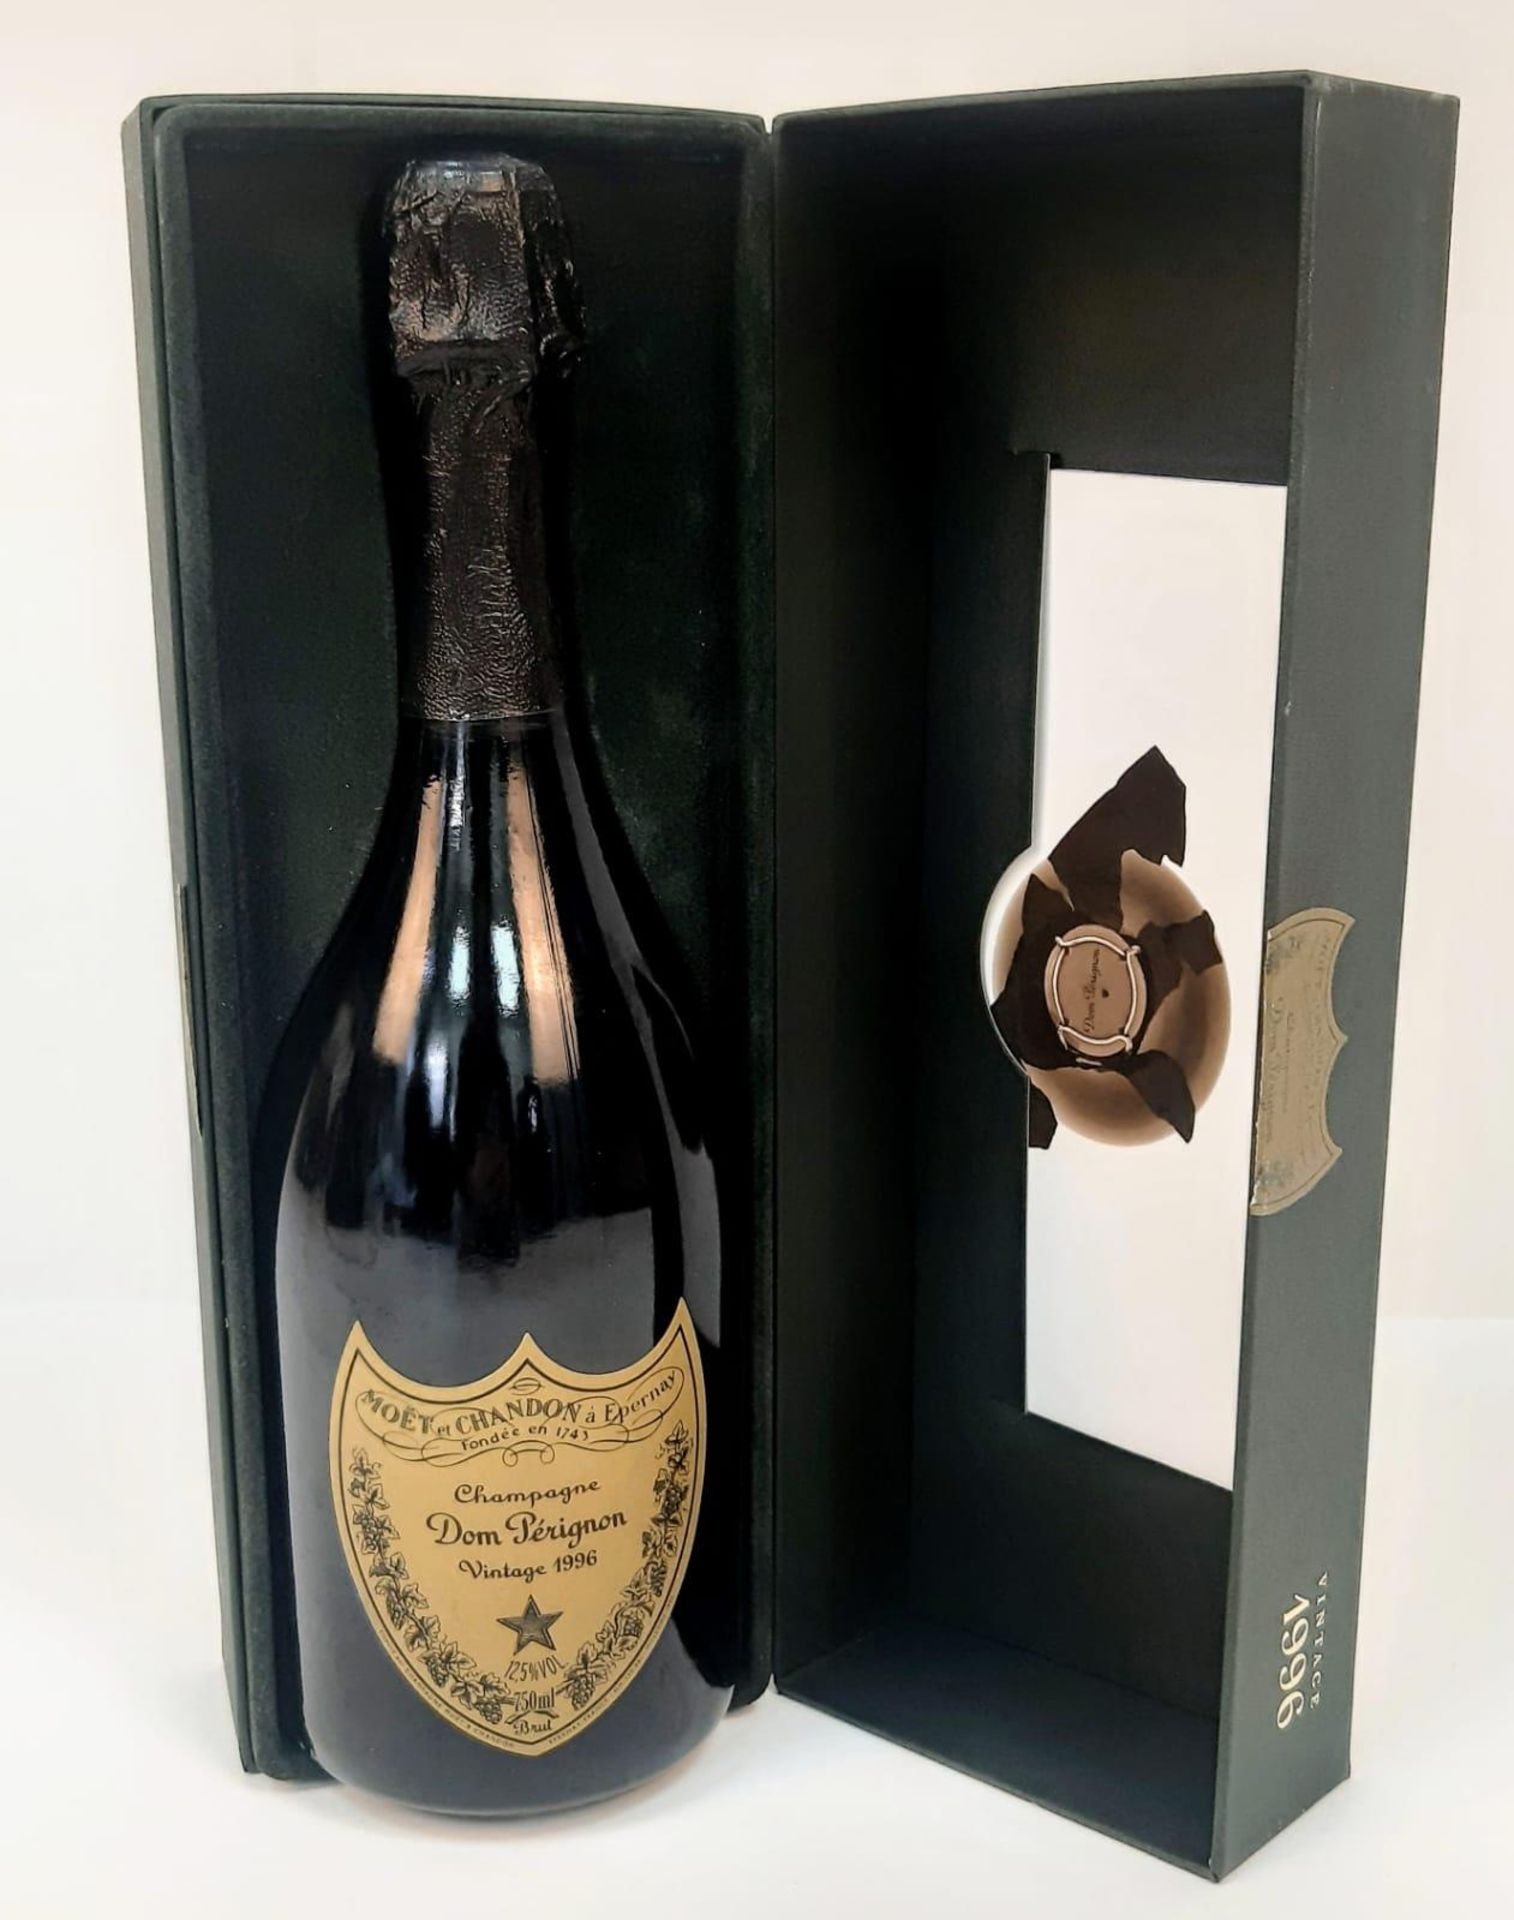 A Bottle (750ml) of Dom Perignon 1996 Vintage Champagne. 1996 was one of the finest vintages from